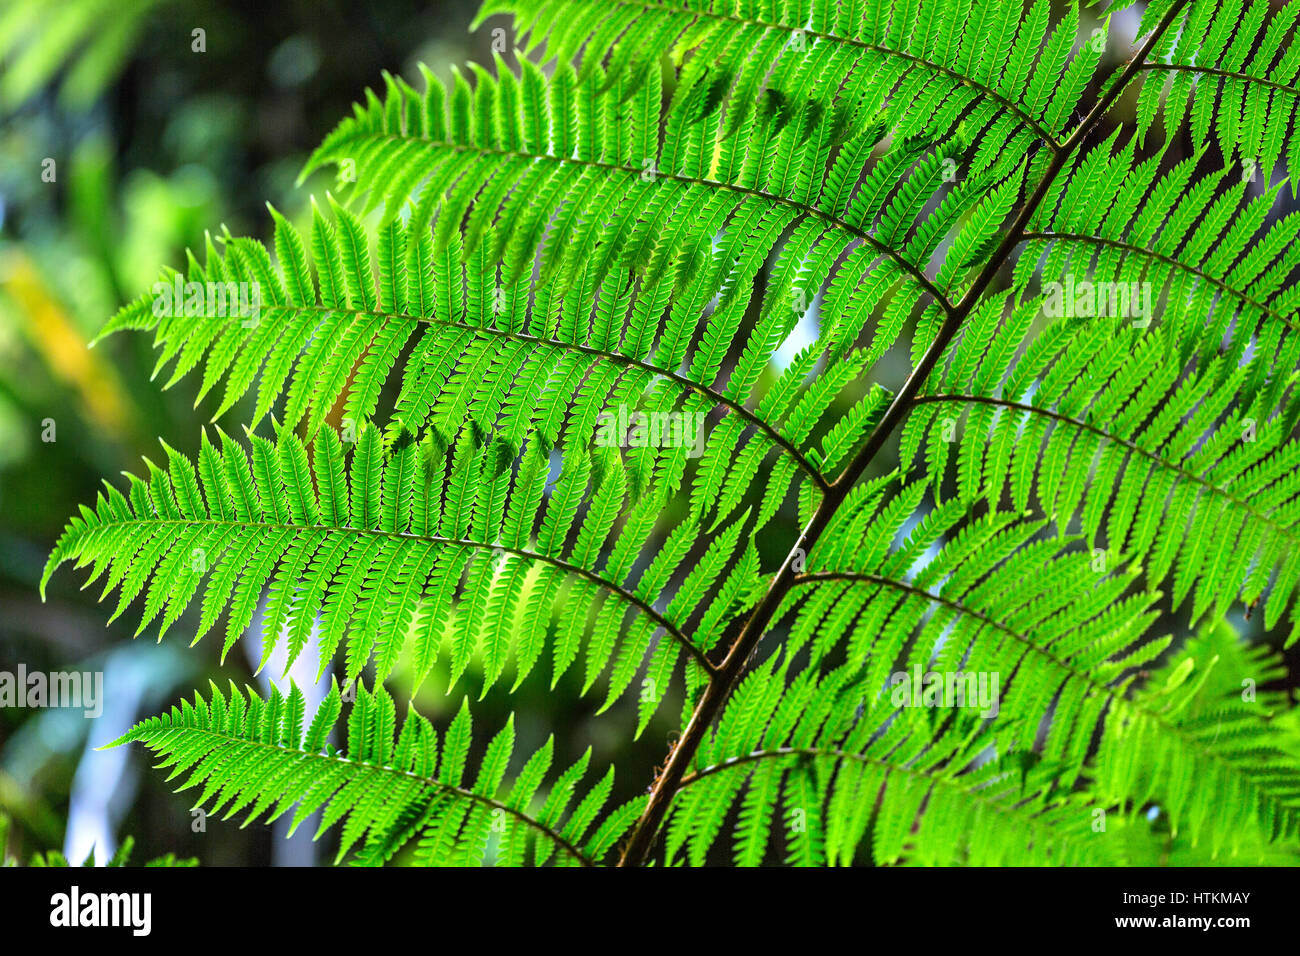 Fern branch with green leaves on the blurry nature background. Closeup photo. Horizontal. Stock Photo